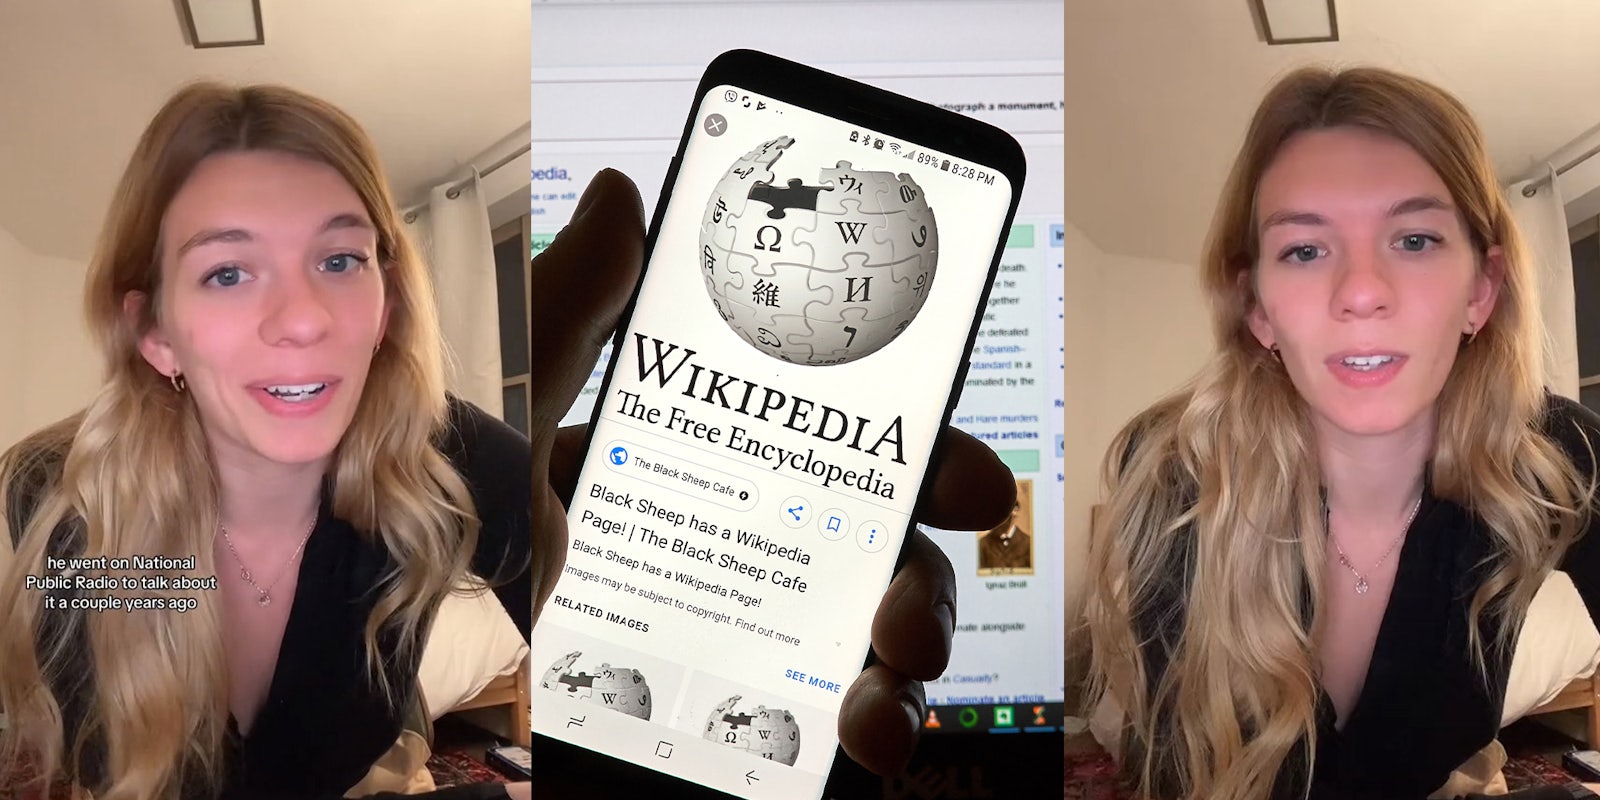 Blond woman wearing black blouse; hand holding up phone with Wikipedia logo shown on screen